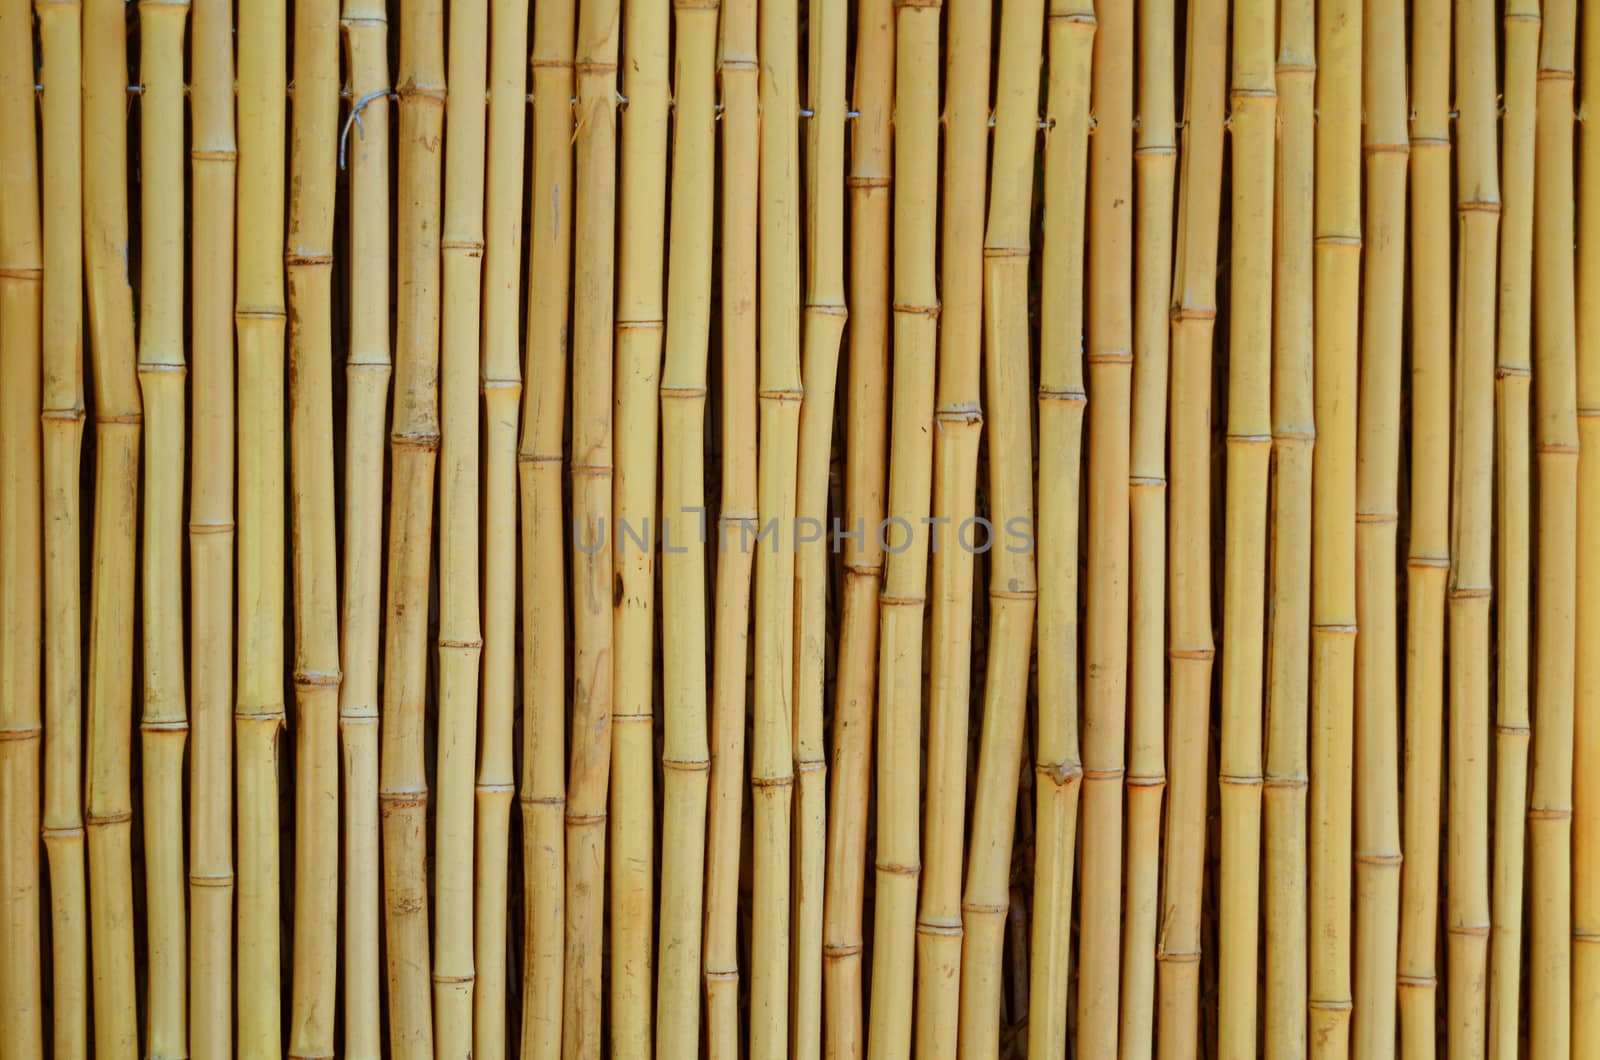 Background Texture Of A Bamboo Fence In The Tropics